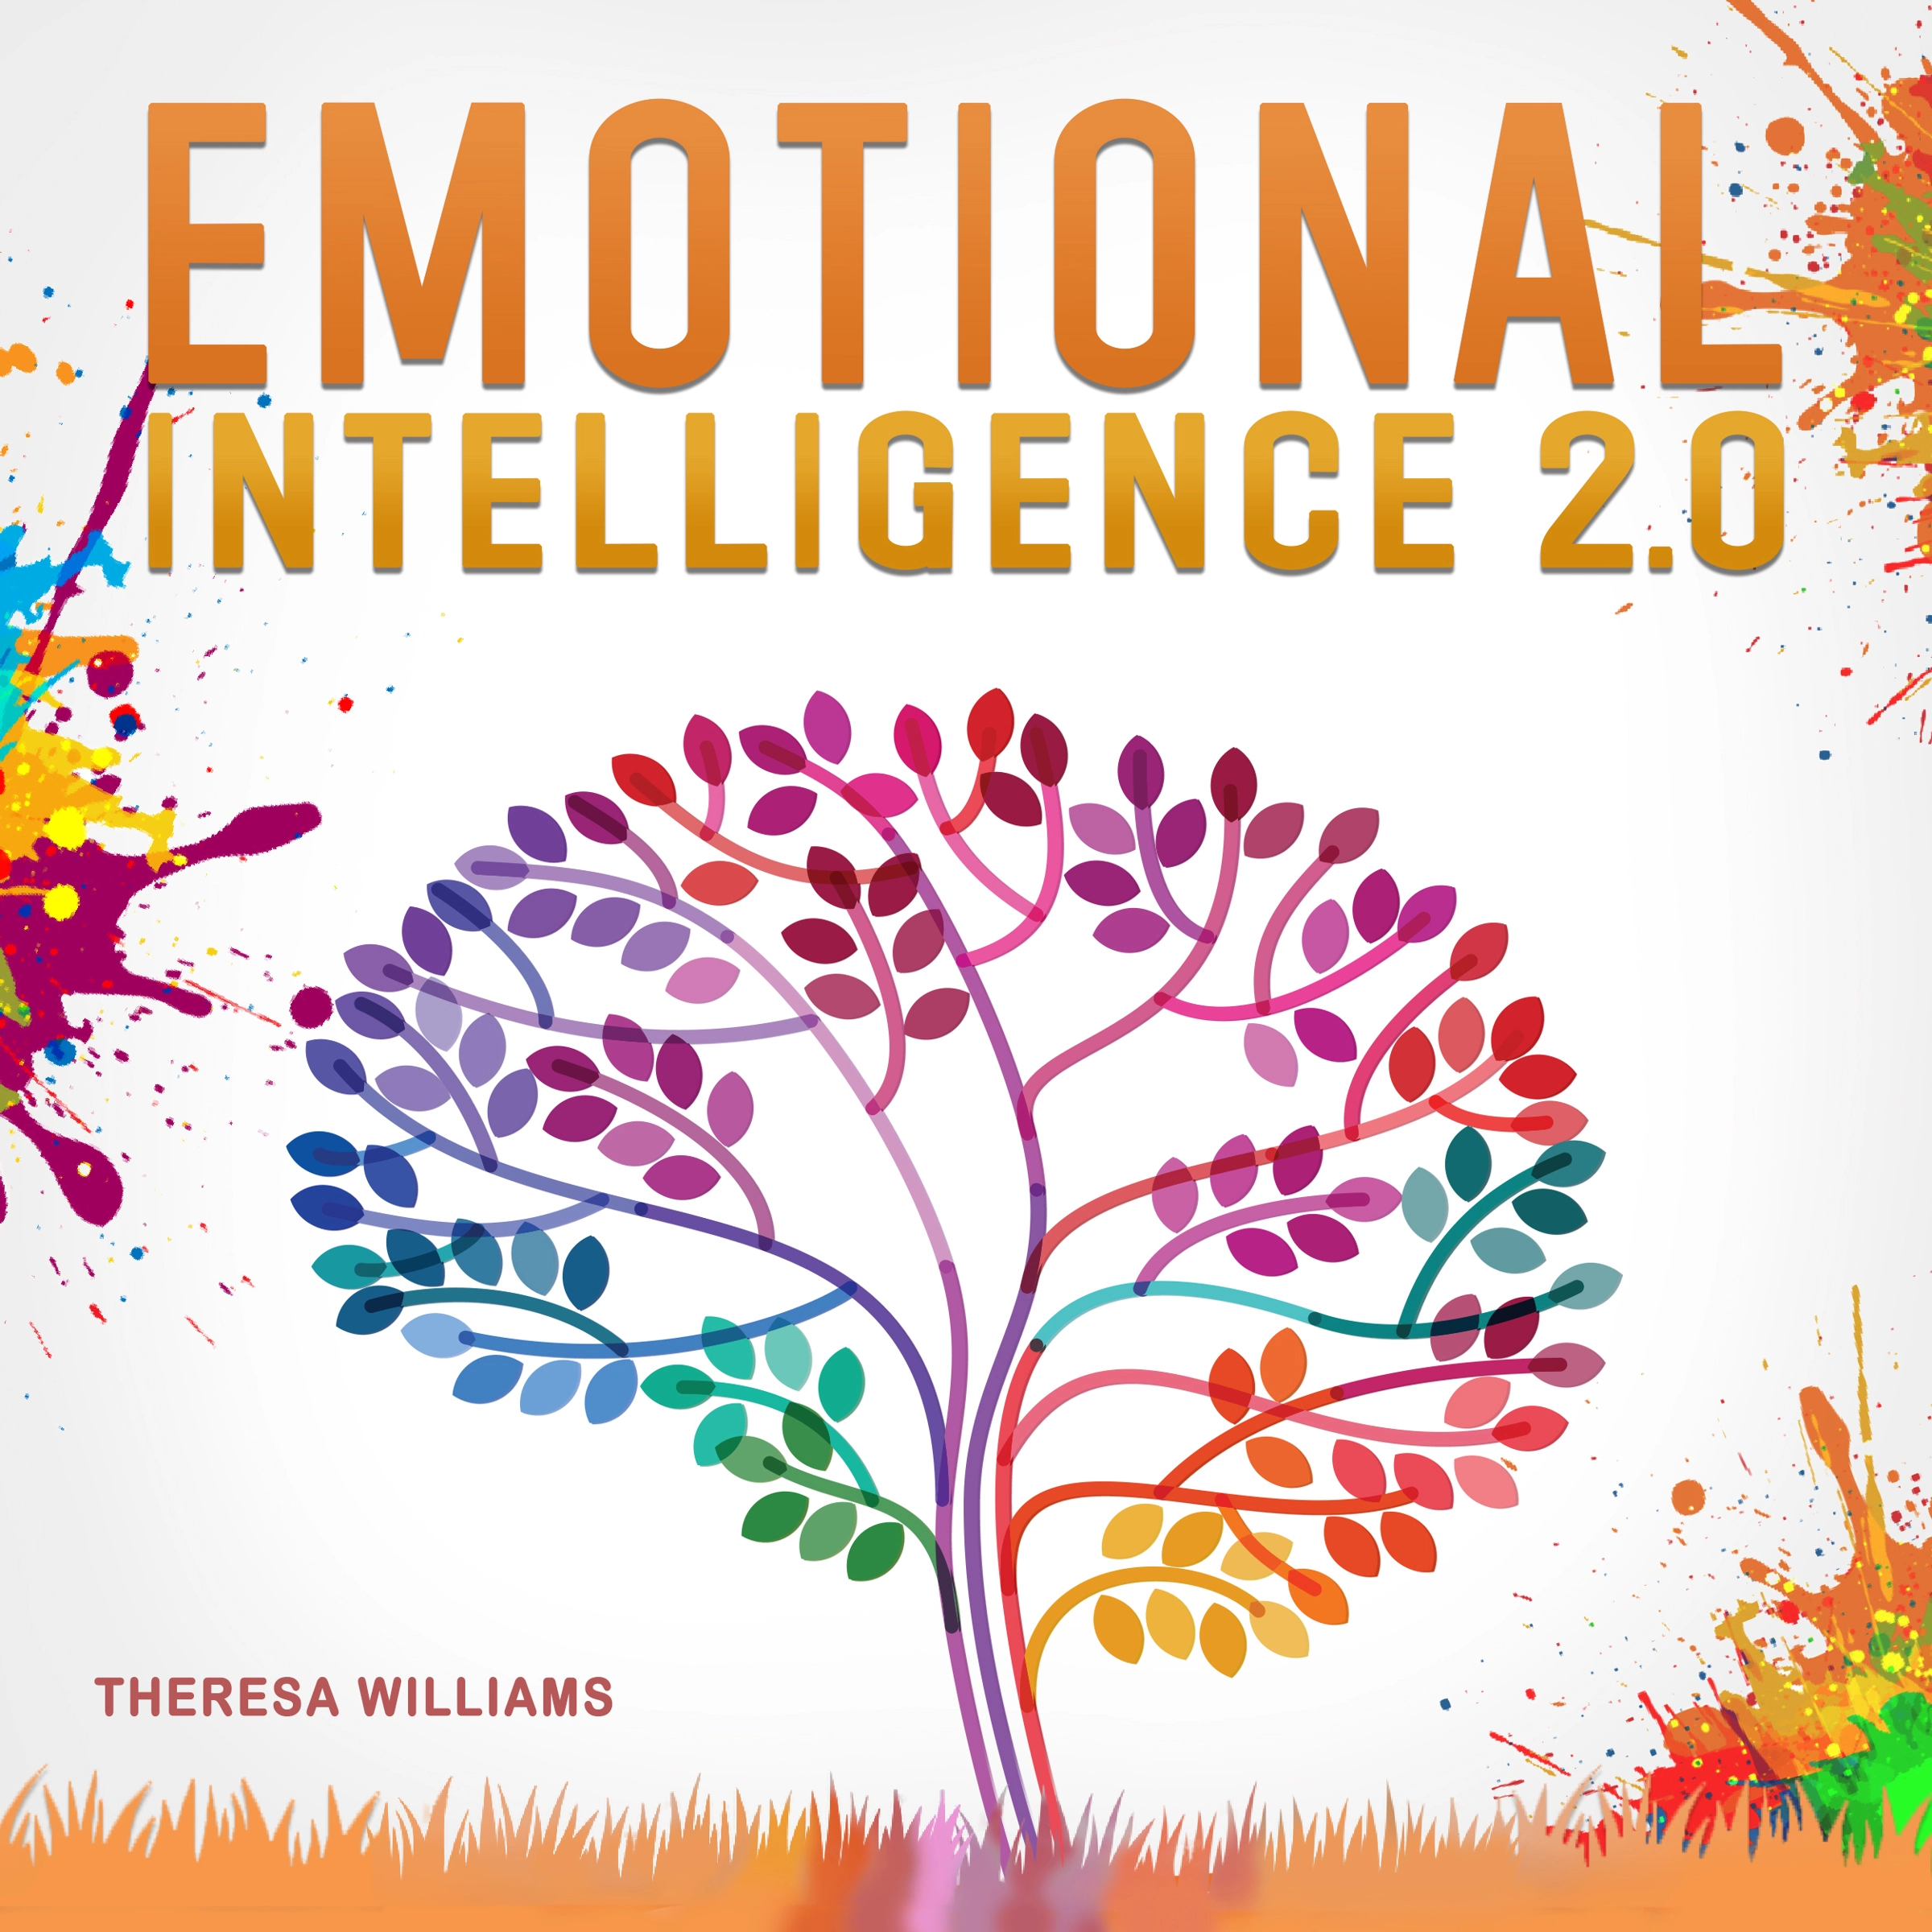 Emotional Intelligence 2.0 Audiobook by Theresa Williams